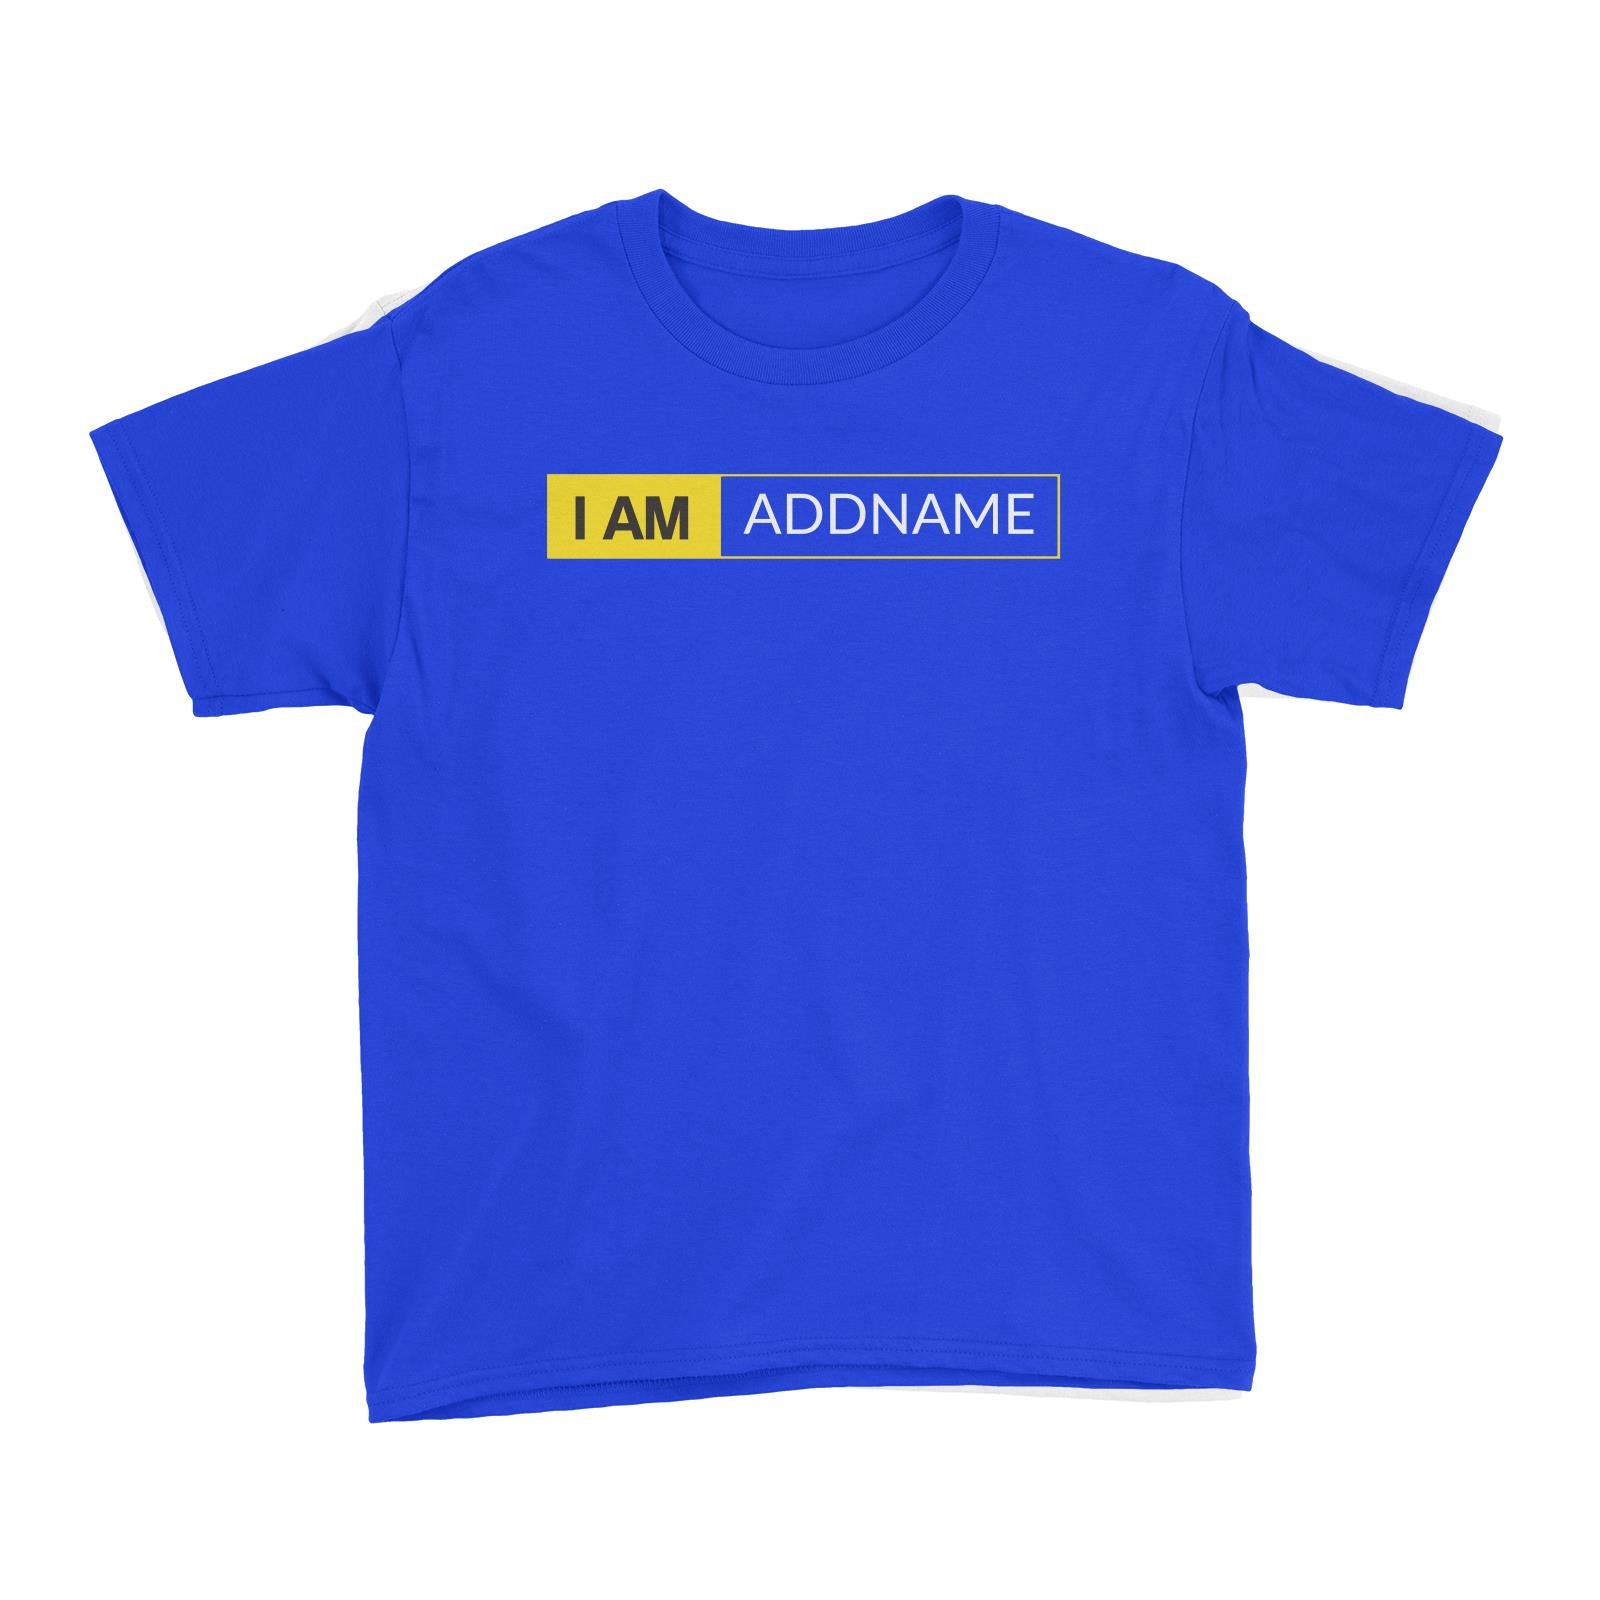 I AM Addname in Yellow Box Kid's T-Shirt Basic Nikon Matching Family Personalizable Designs